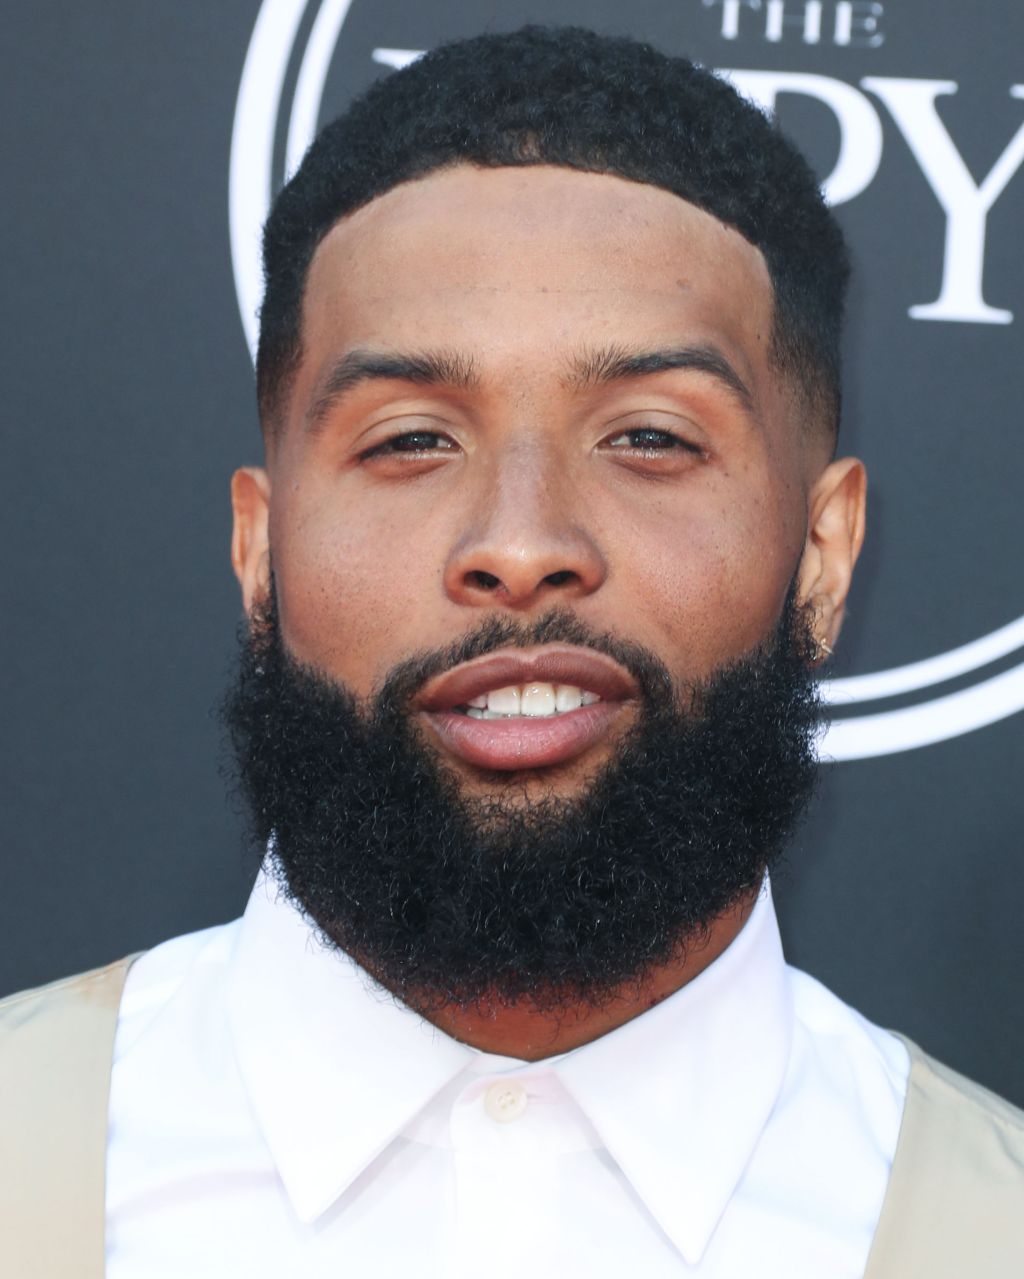 Football wide receiver Odell Beckham Jr. wearing Prada arrives at the 2019 ESPY Awards held at Microsoft Theater L.A. Live on July 10, 2019 in Los Angeles, California, United States. (Photo by Xavier Collin/Image Press Agency)